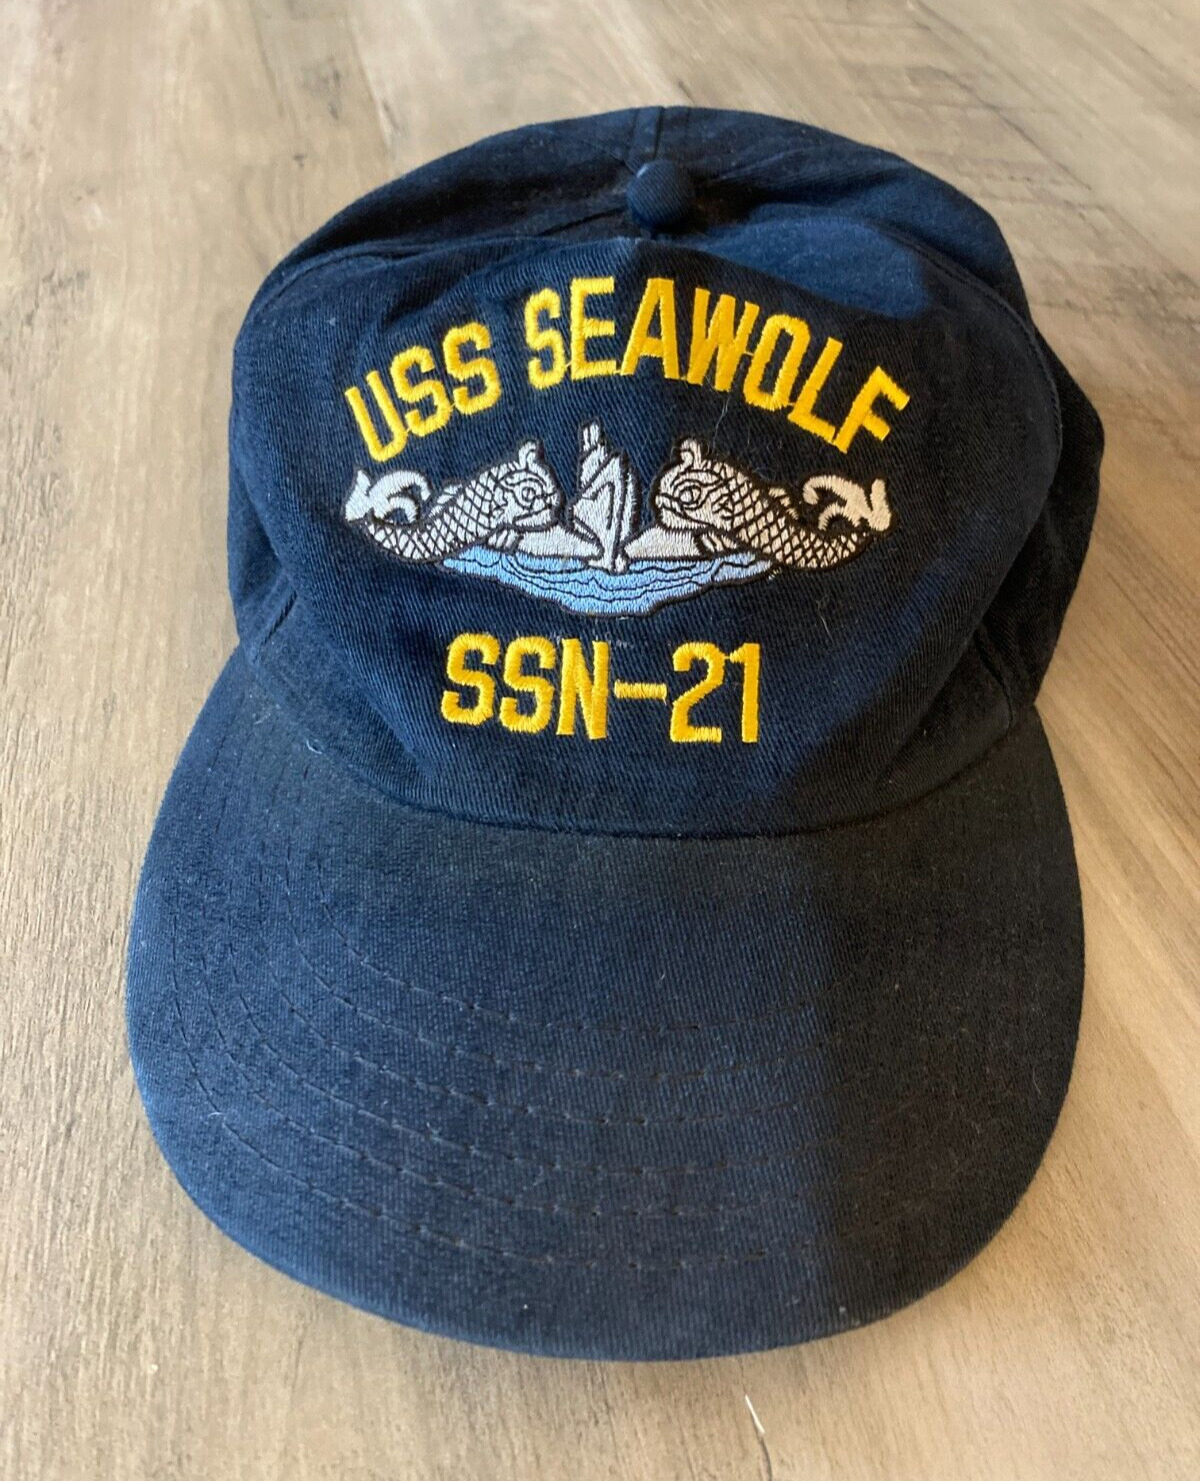 Vintage USS Seawolf SSN-21 Navy Blue Embroidered Snap-Back Adjustable Cap